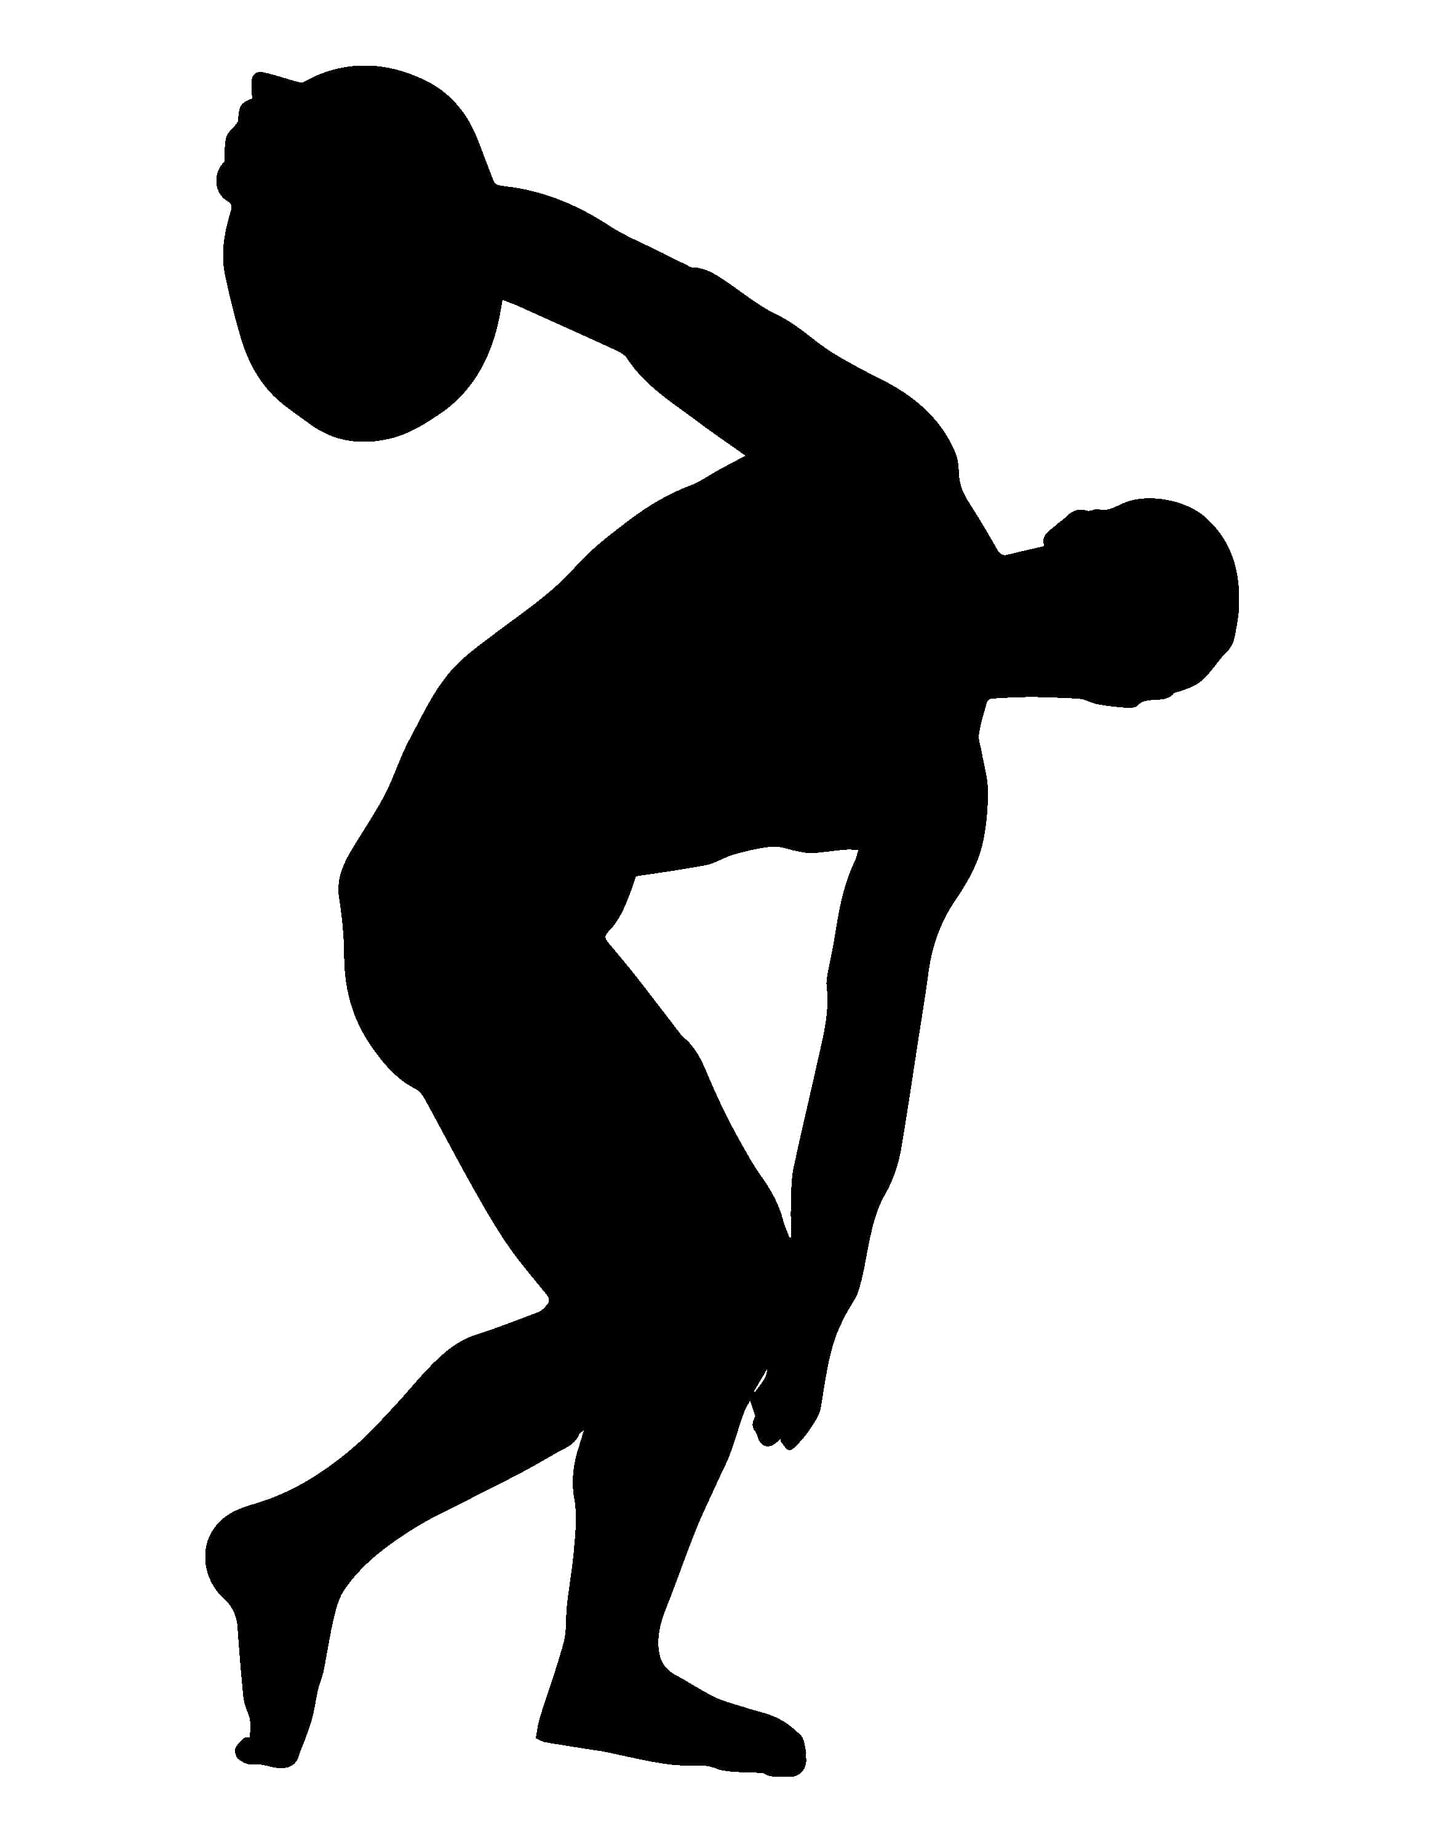 Olympic Discus Thrower Silhouette Vinyl Wall Decal Sticker.  #OS_MB539